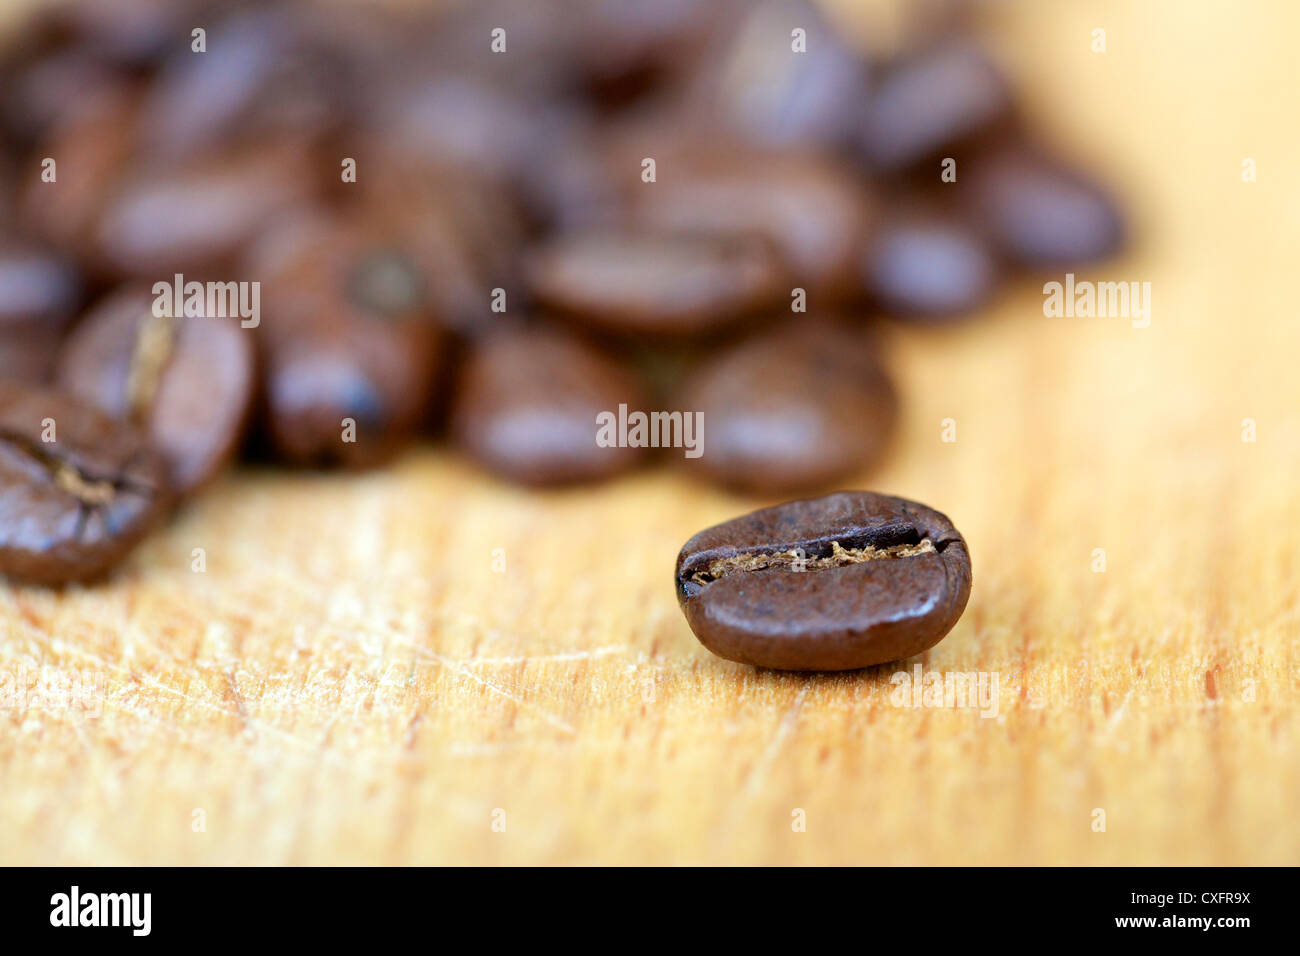 Coffee beans on wooden cutting board. Still life, shallow depth of field. Stock Photo